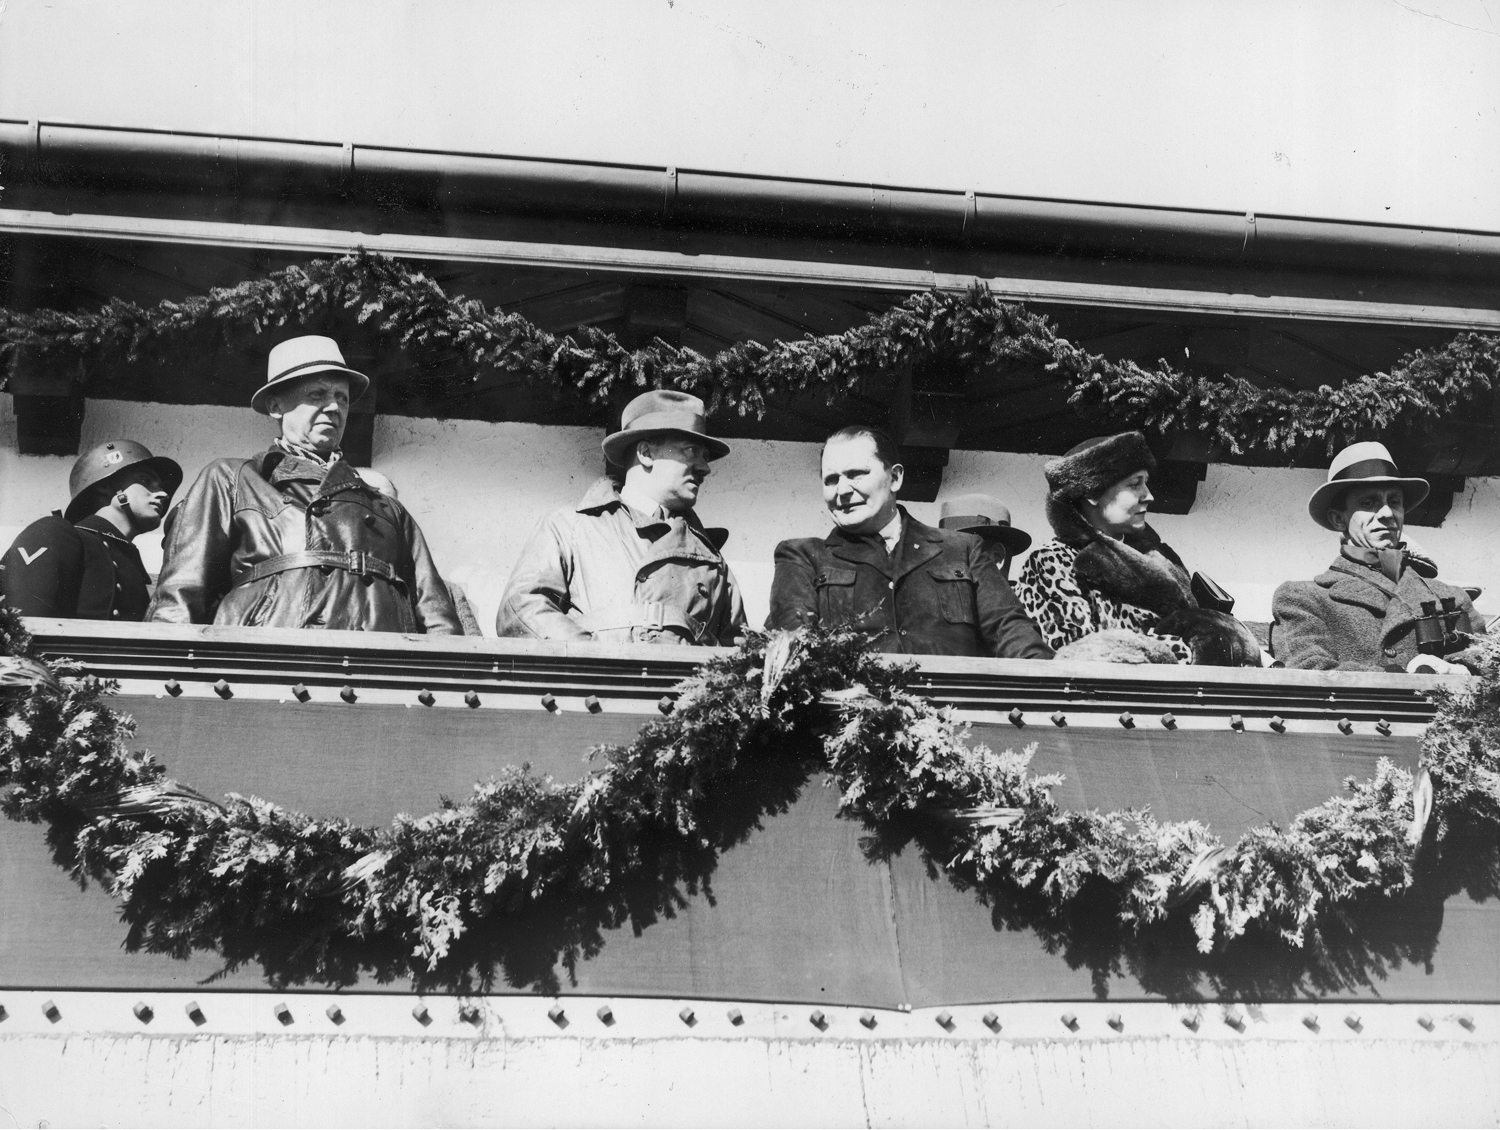 Adolf Hitler at the balcony of the Olympic House